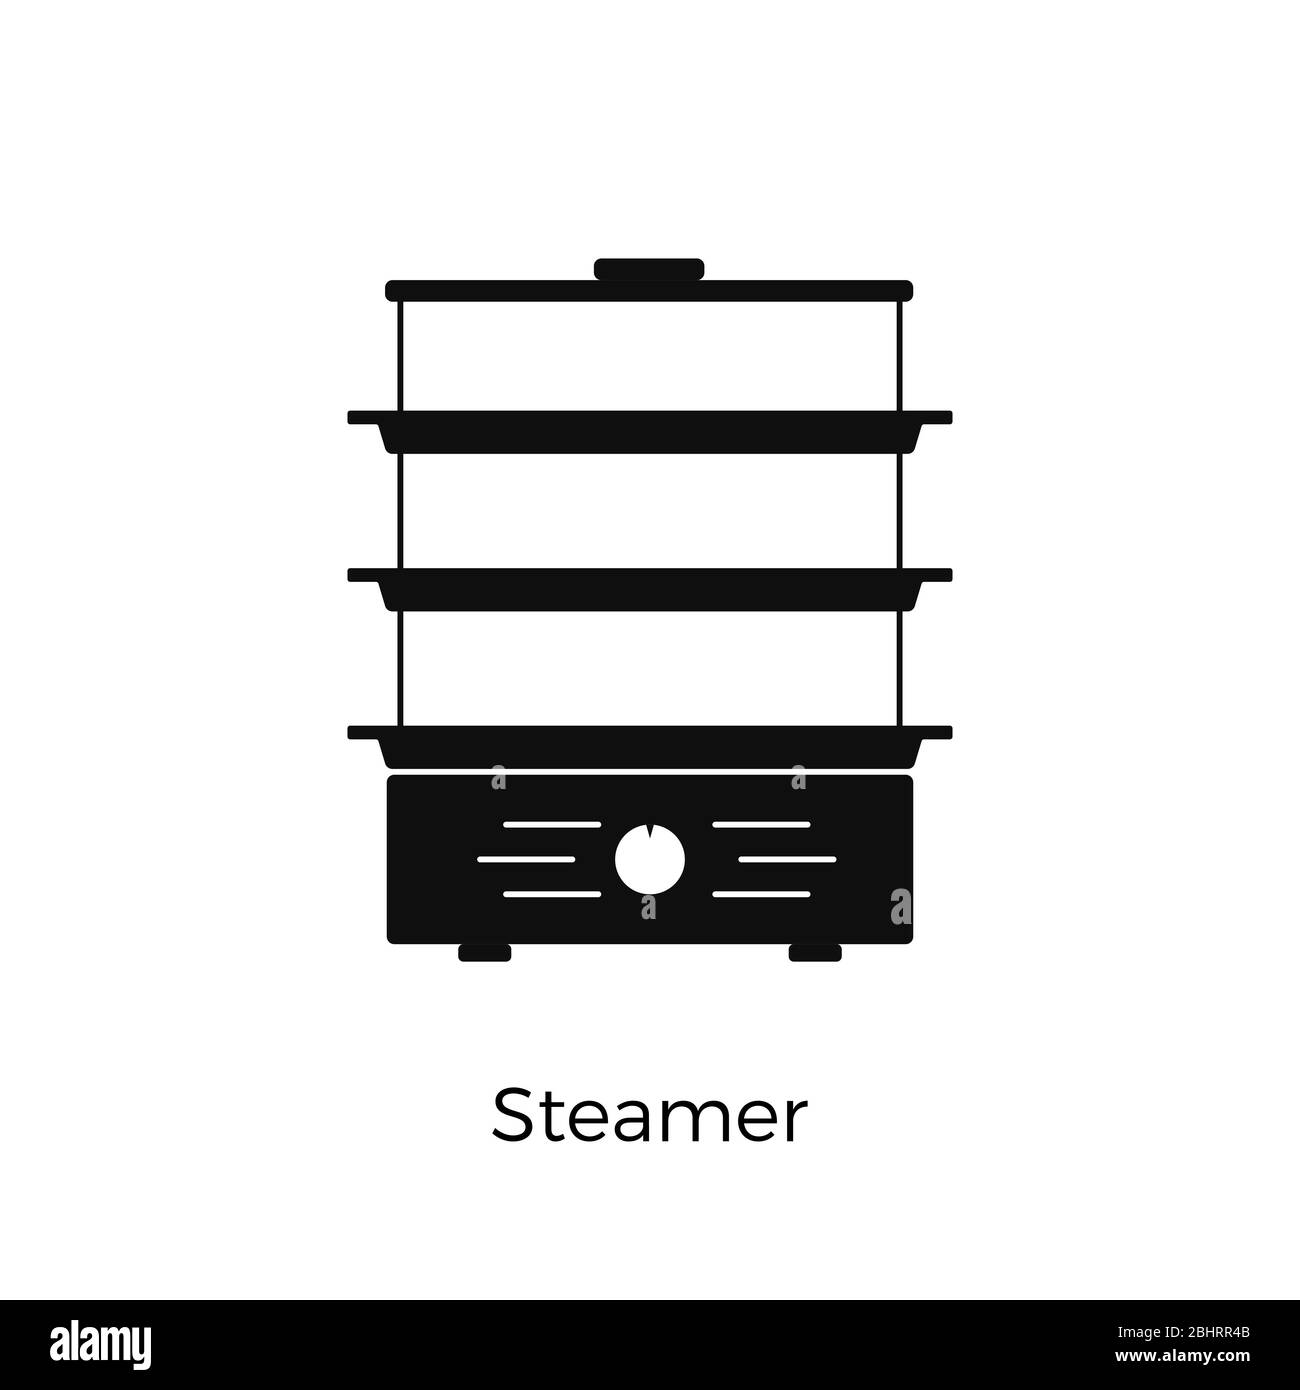 Steamer simple icon. Kitchen appliance. Vector illustration isolated on white background Stock Vector